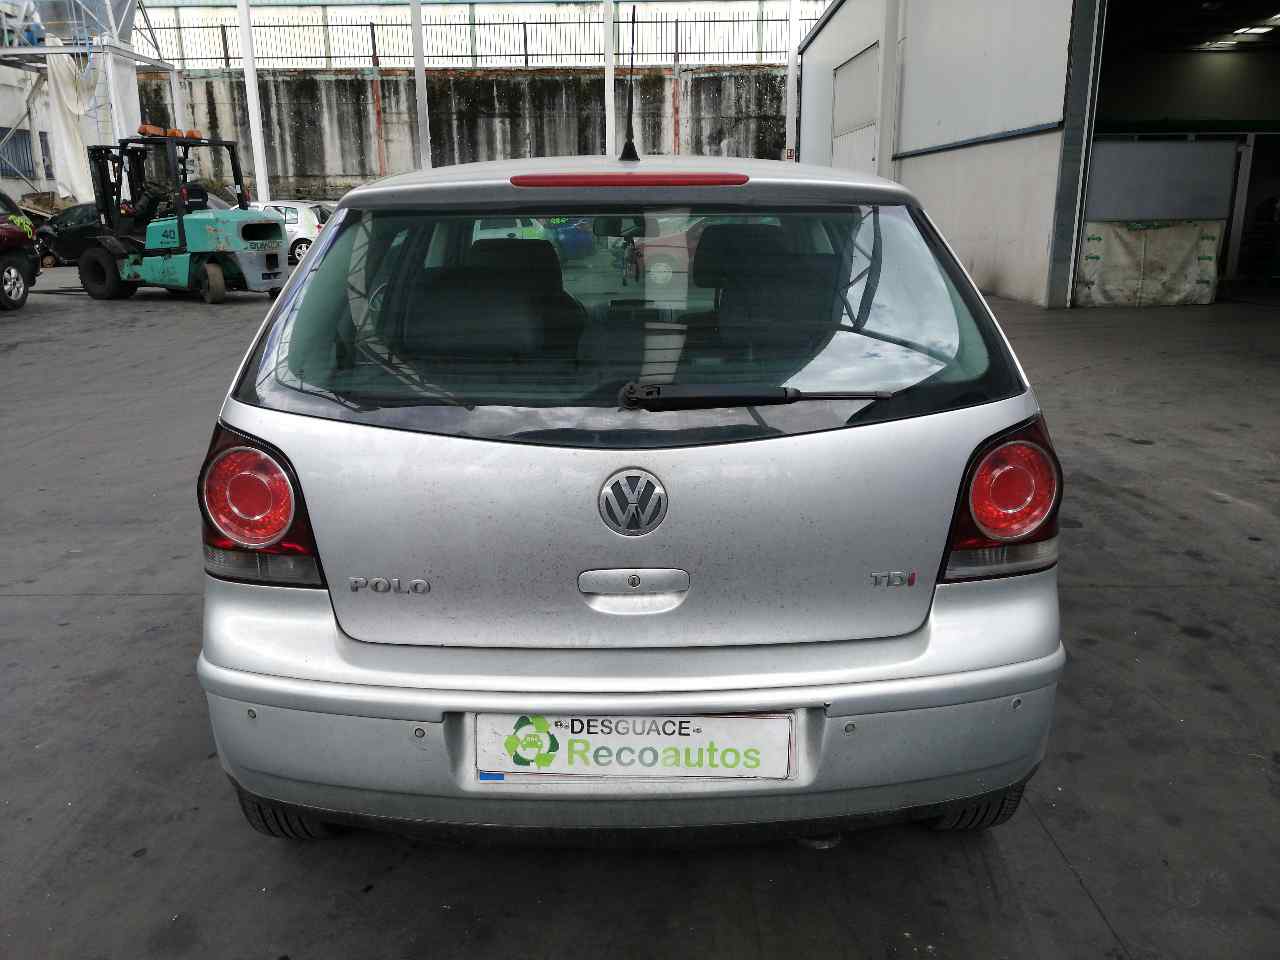 VOLKSWAGEN Polo 4 generation (2001-2009) Other Control Units 6Q0919050B, 220212007004 19918323